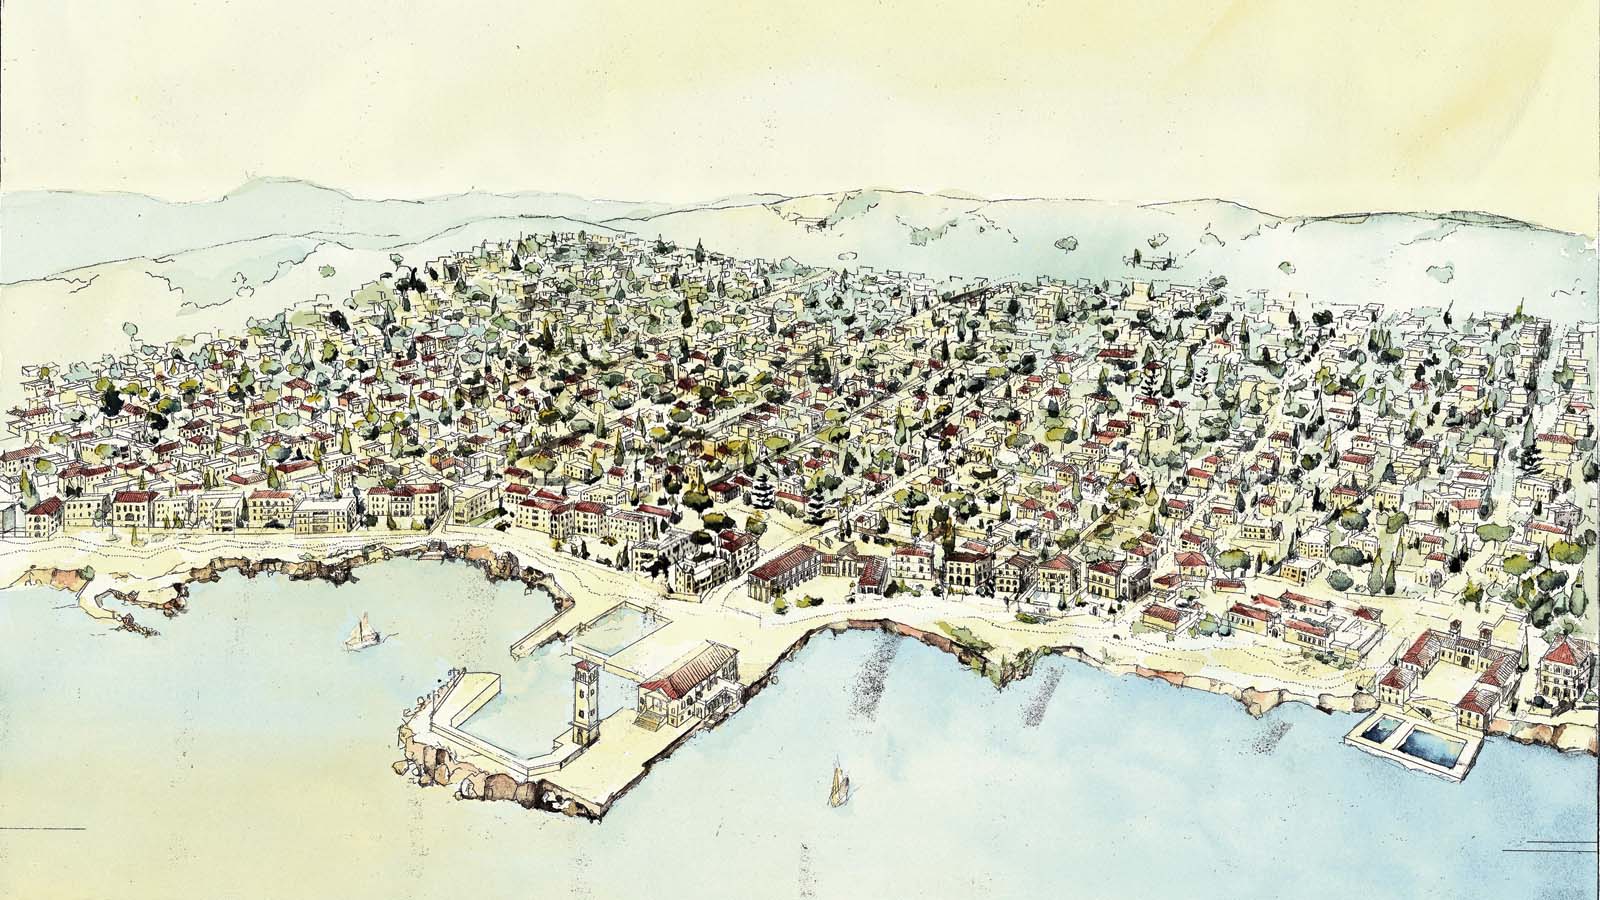 An architectural sketch of the city of Mati.